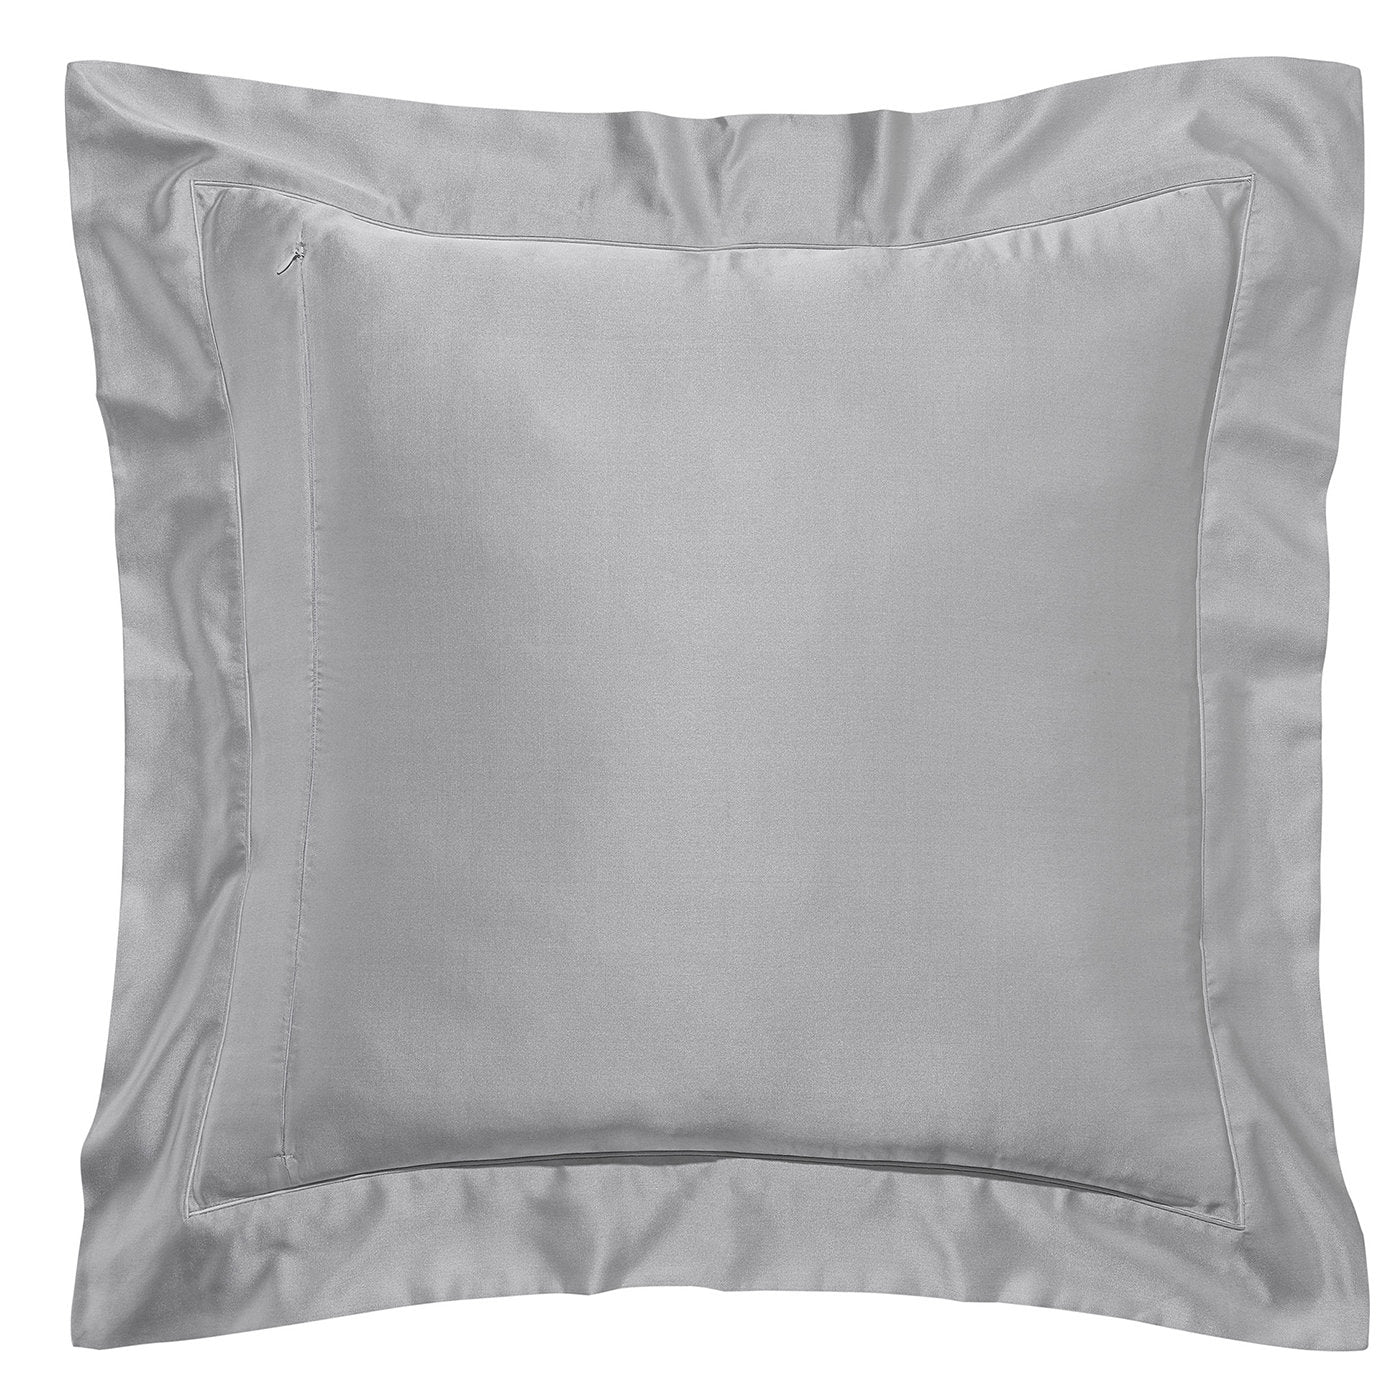 Solid Gray Pillow Case  - Alternative view 1